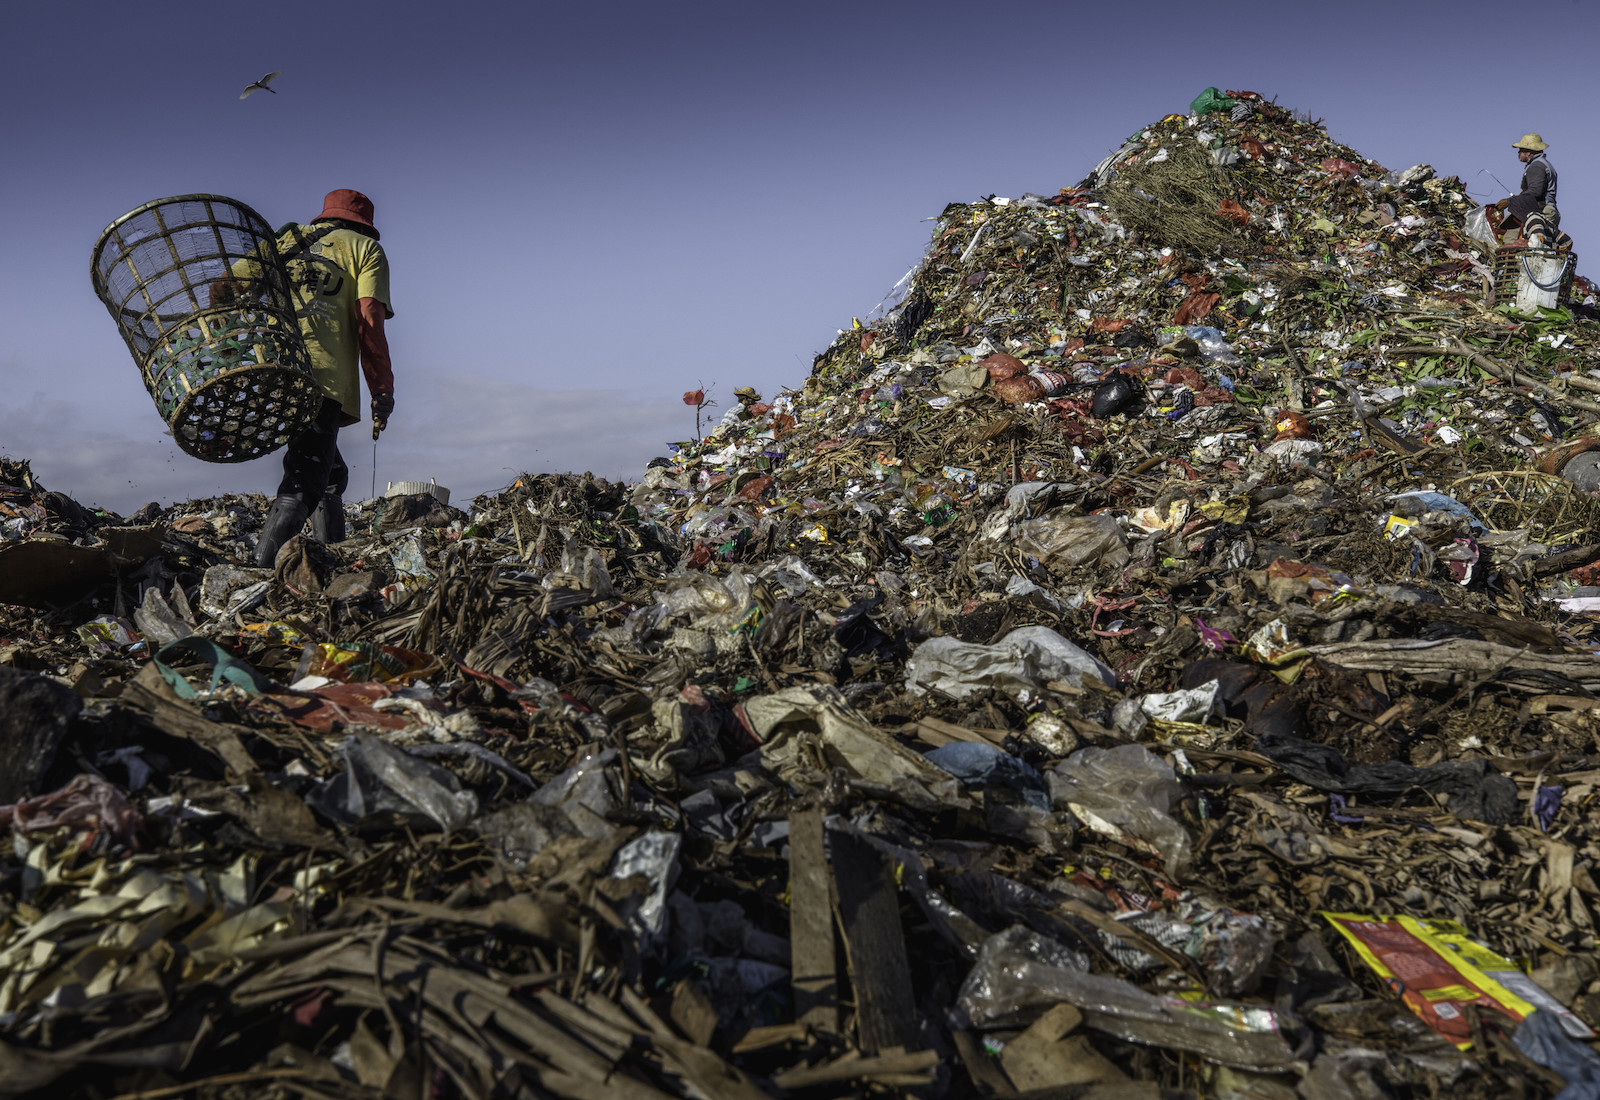 Two people with baskets collecting garbage on a mountain of trash